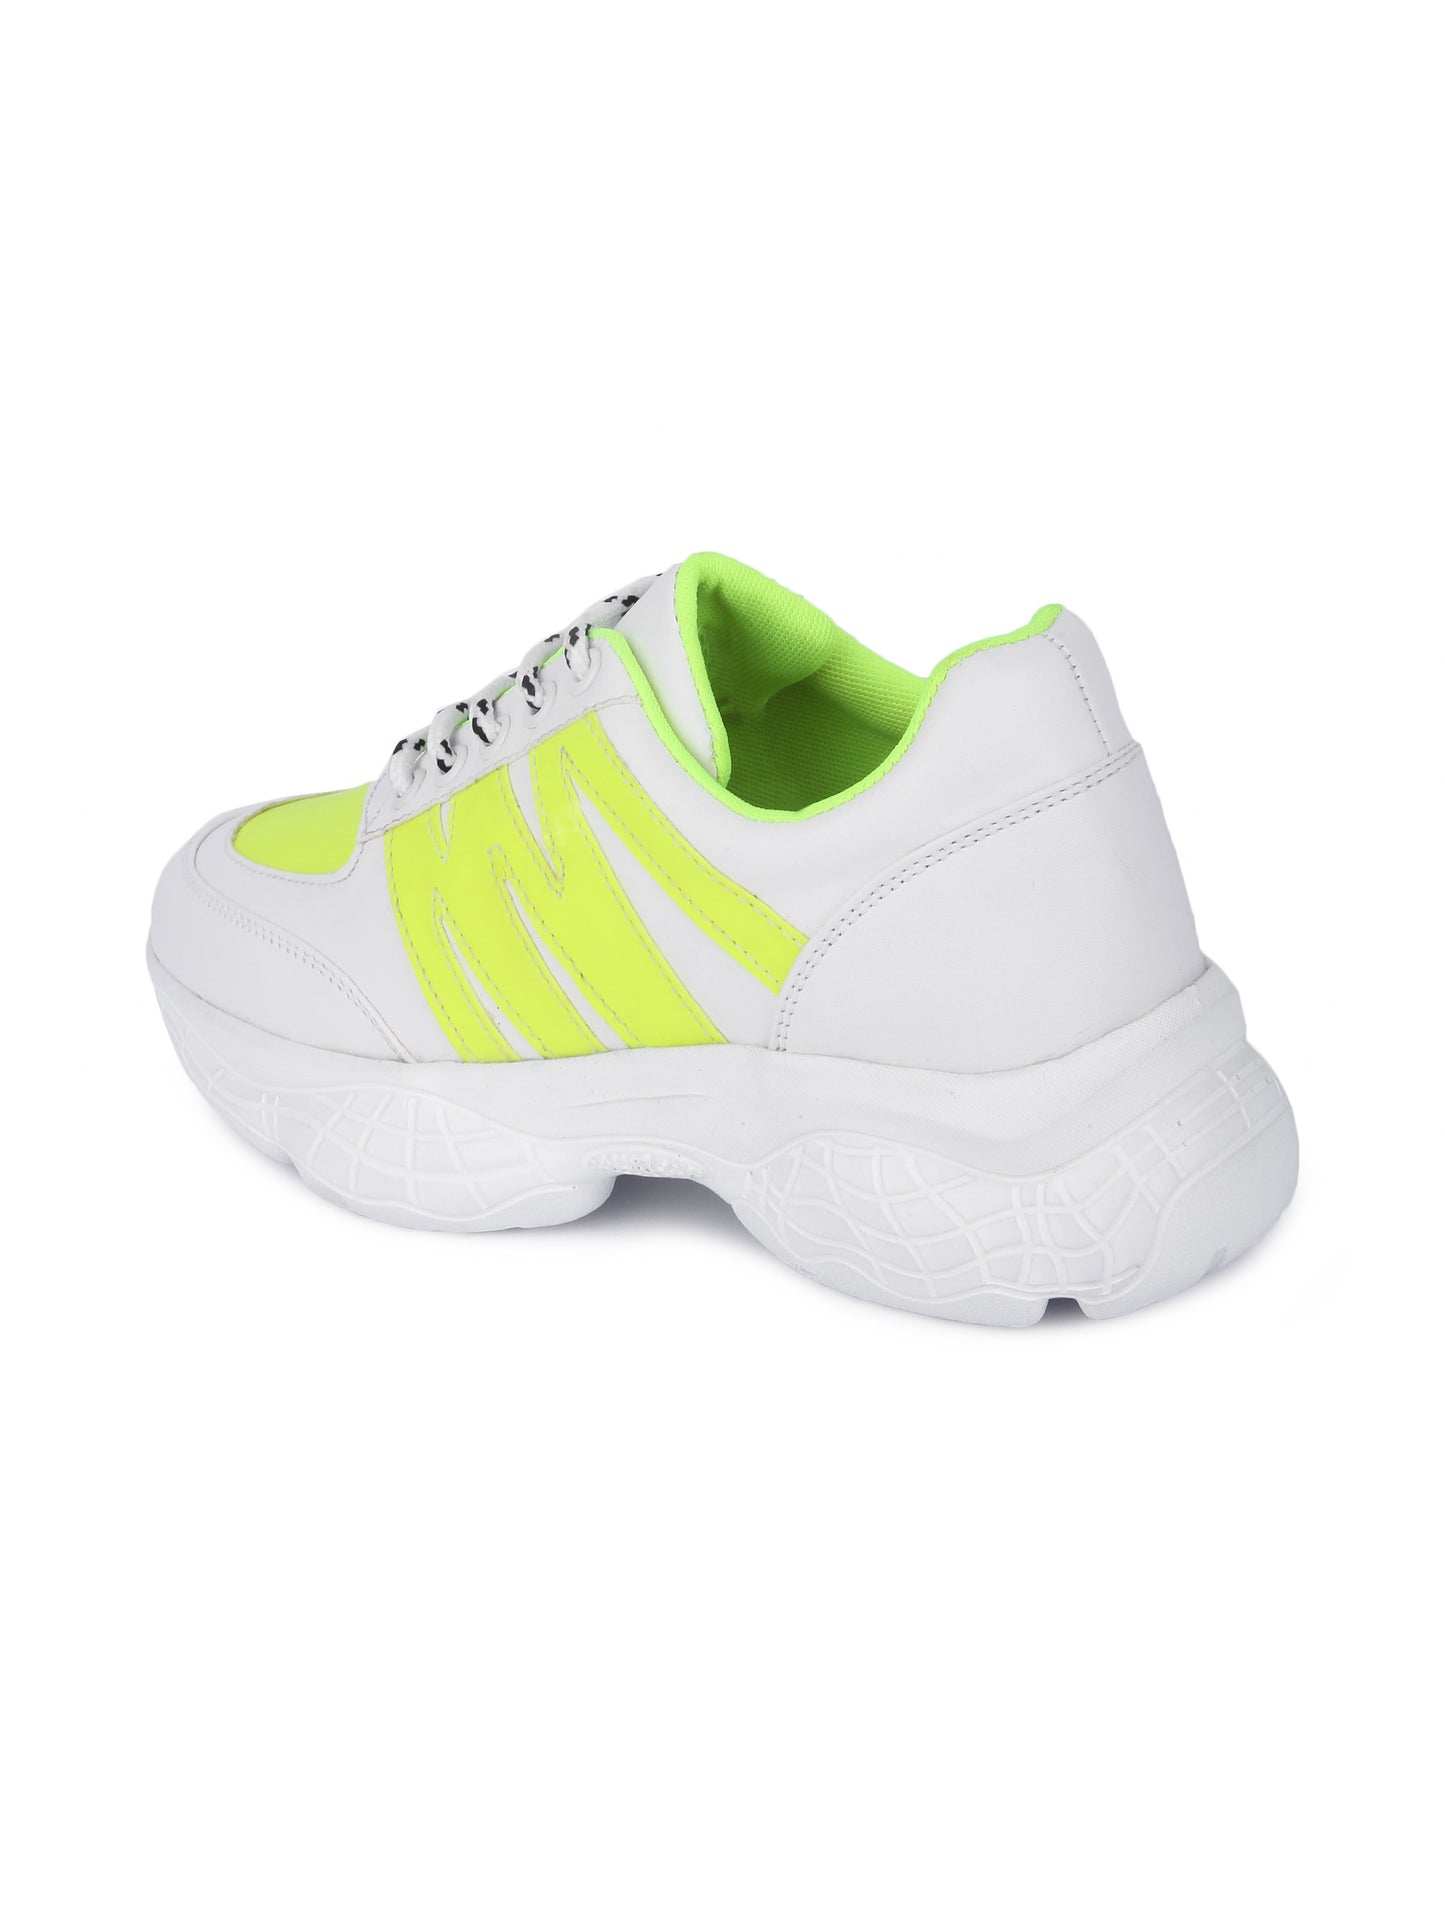 White and Neon Striped Casual Sneaker